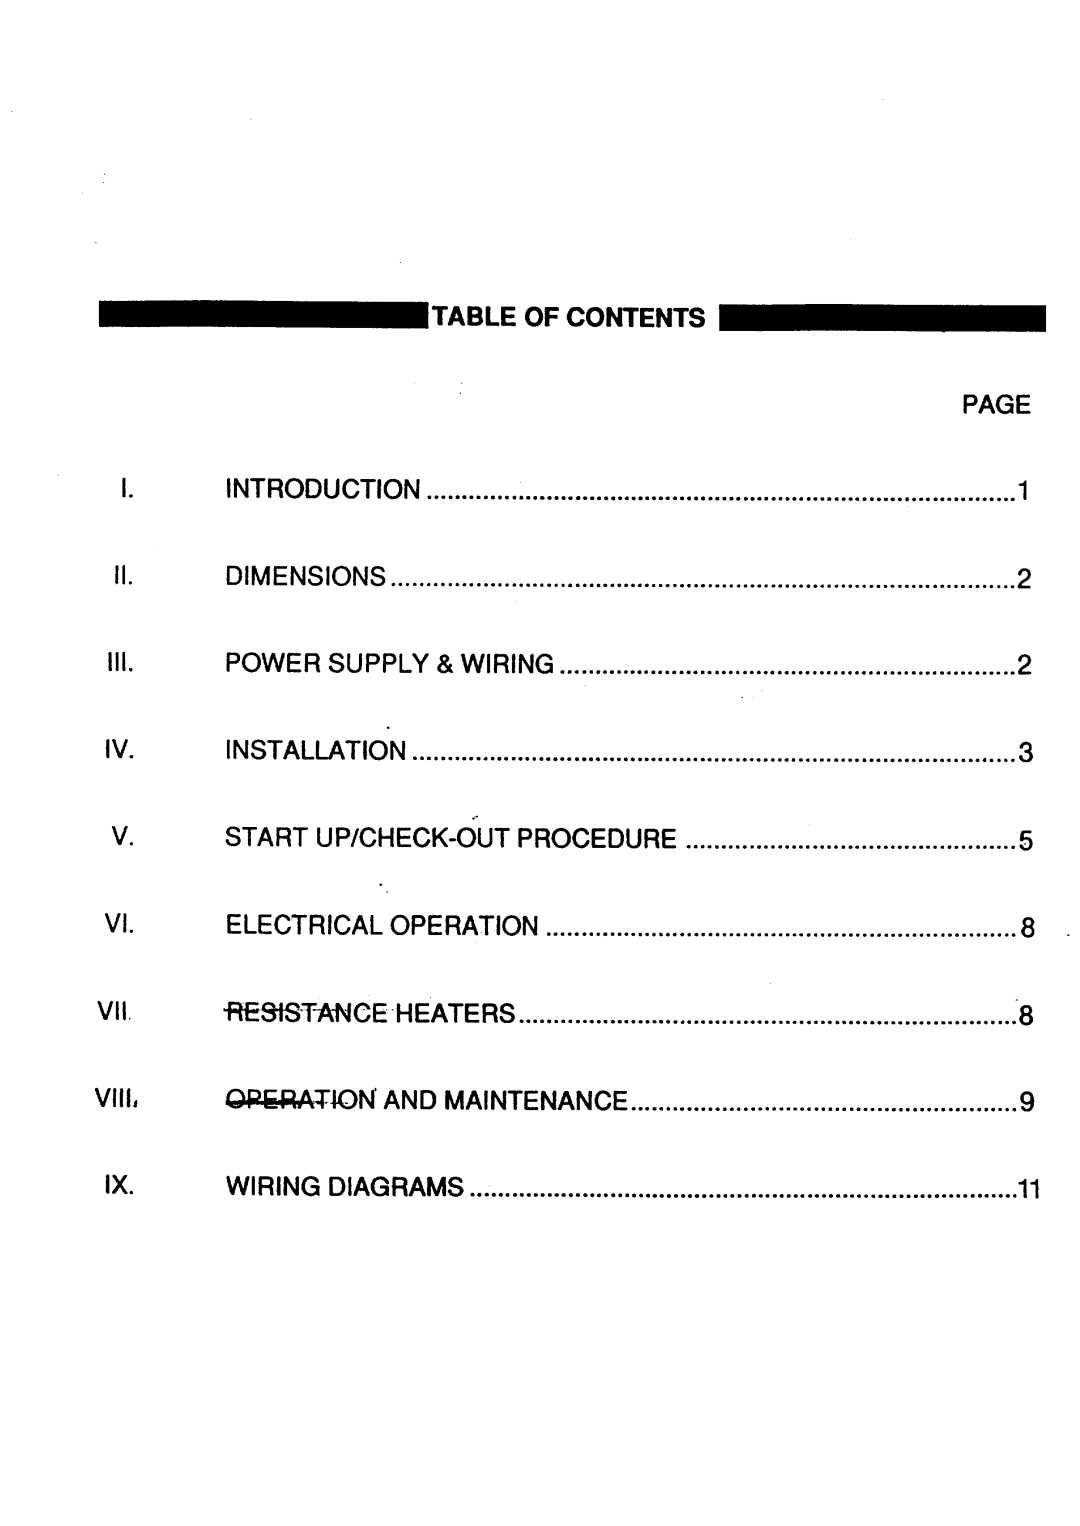 Goetti Air Conditioning Heat Pump manual Of Contents 